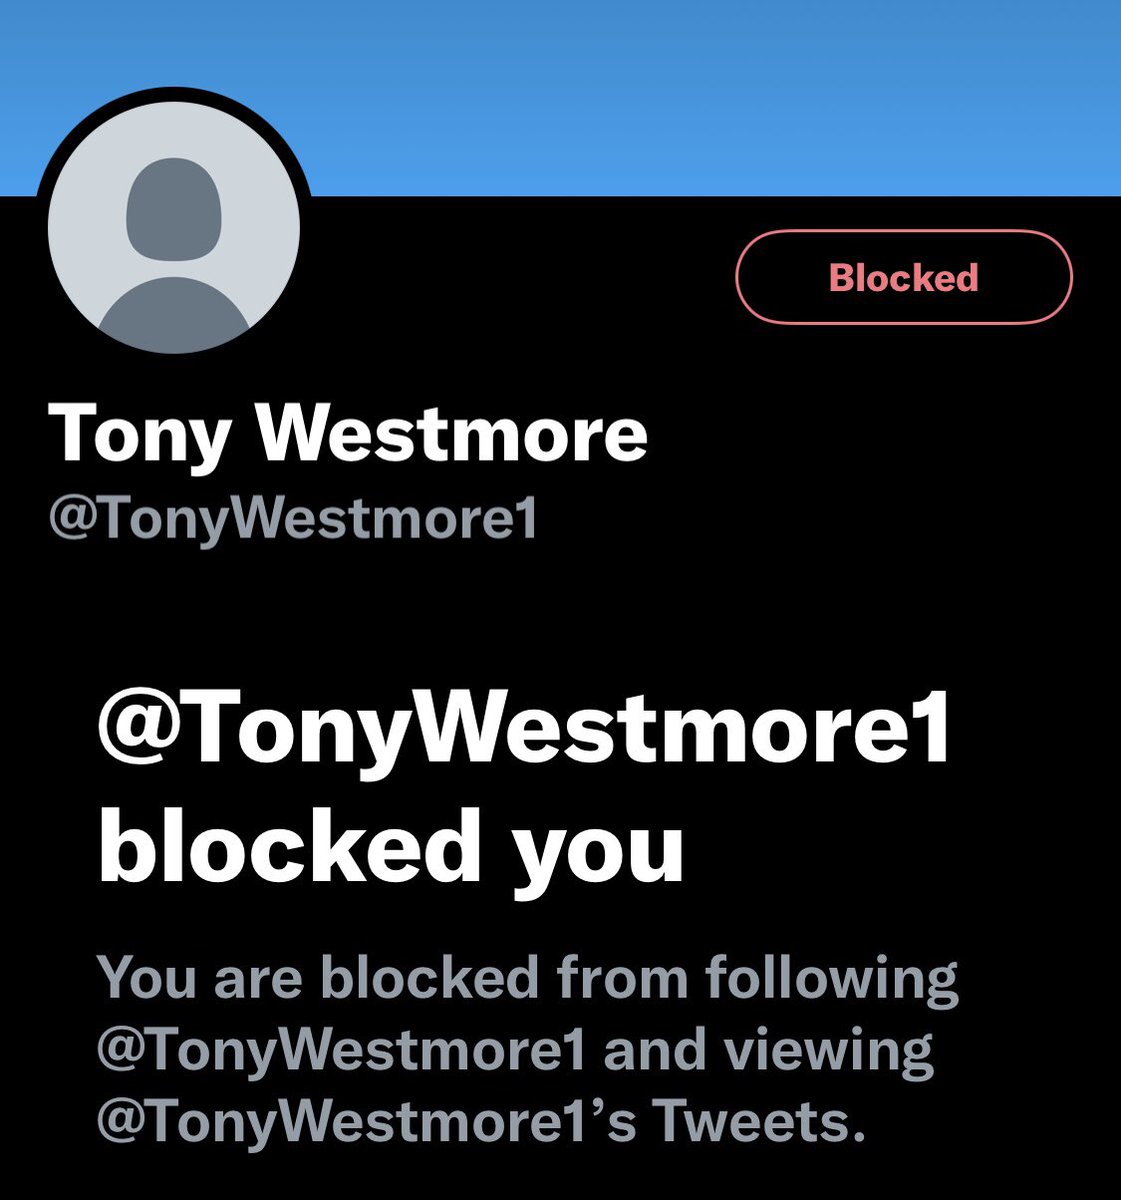 Some friends & myself are being harassed by @tonywestmore1 He’s telling lies & trying to poke for an argument:as trolls do. If you’re following him, wld you pls block ME so I can make the distance between my account & his as wide as possible. Twitter are aware. Thank you.